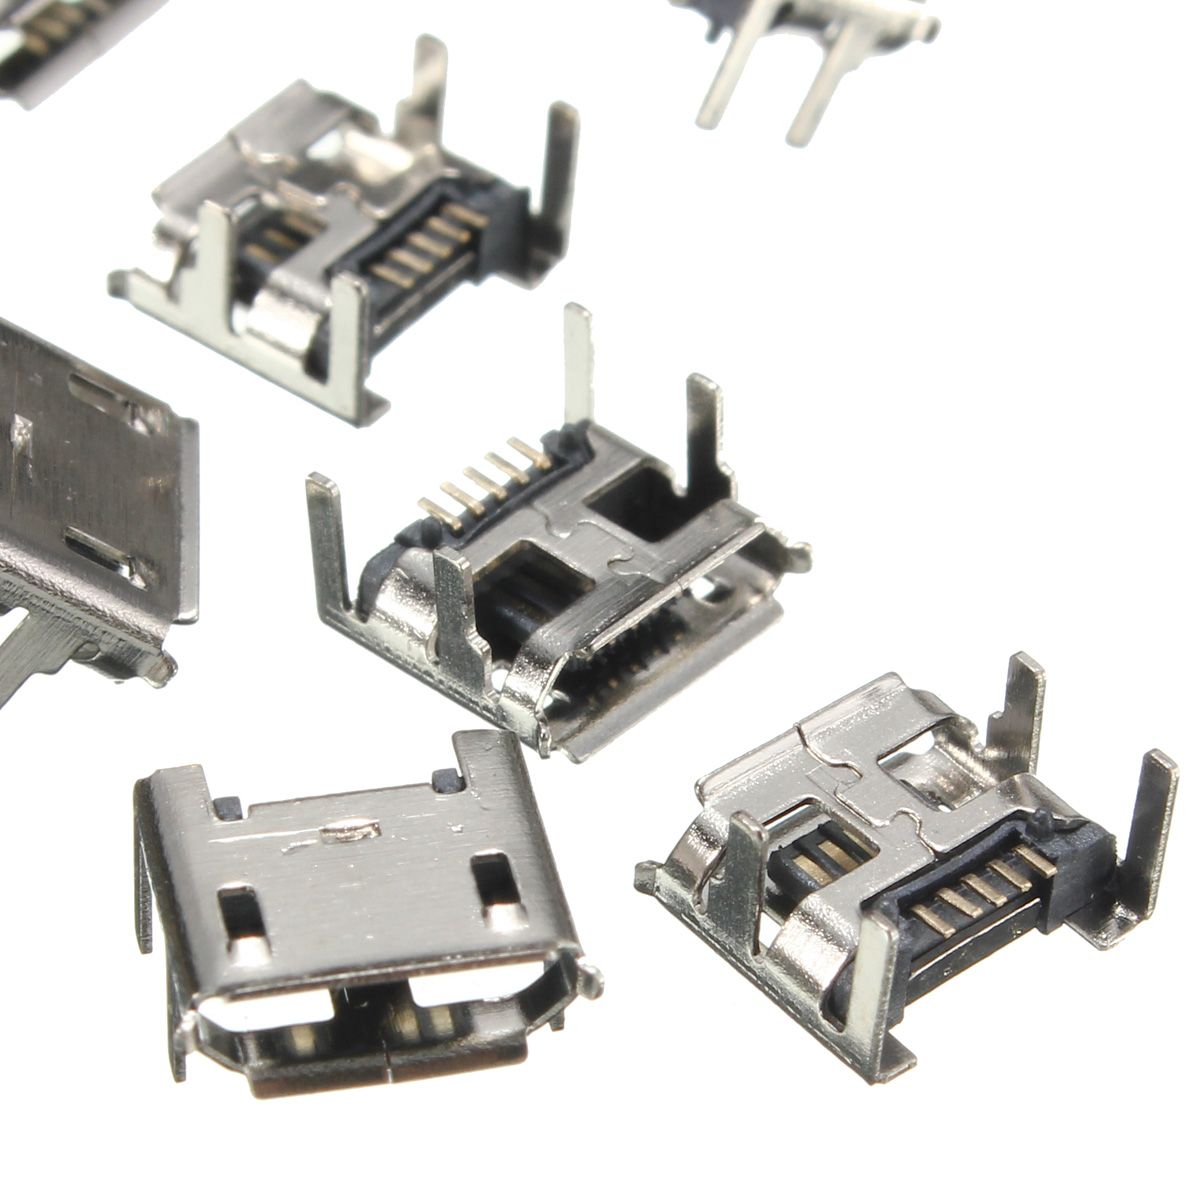 30pcs-Micro-USB-Type-B-5-Pin-Female-Socket-4-Vertical-Legs-For-Solder-Connector-1370526